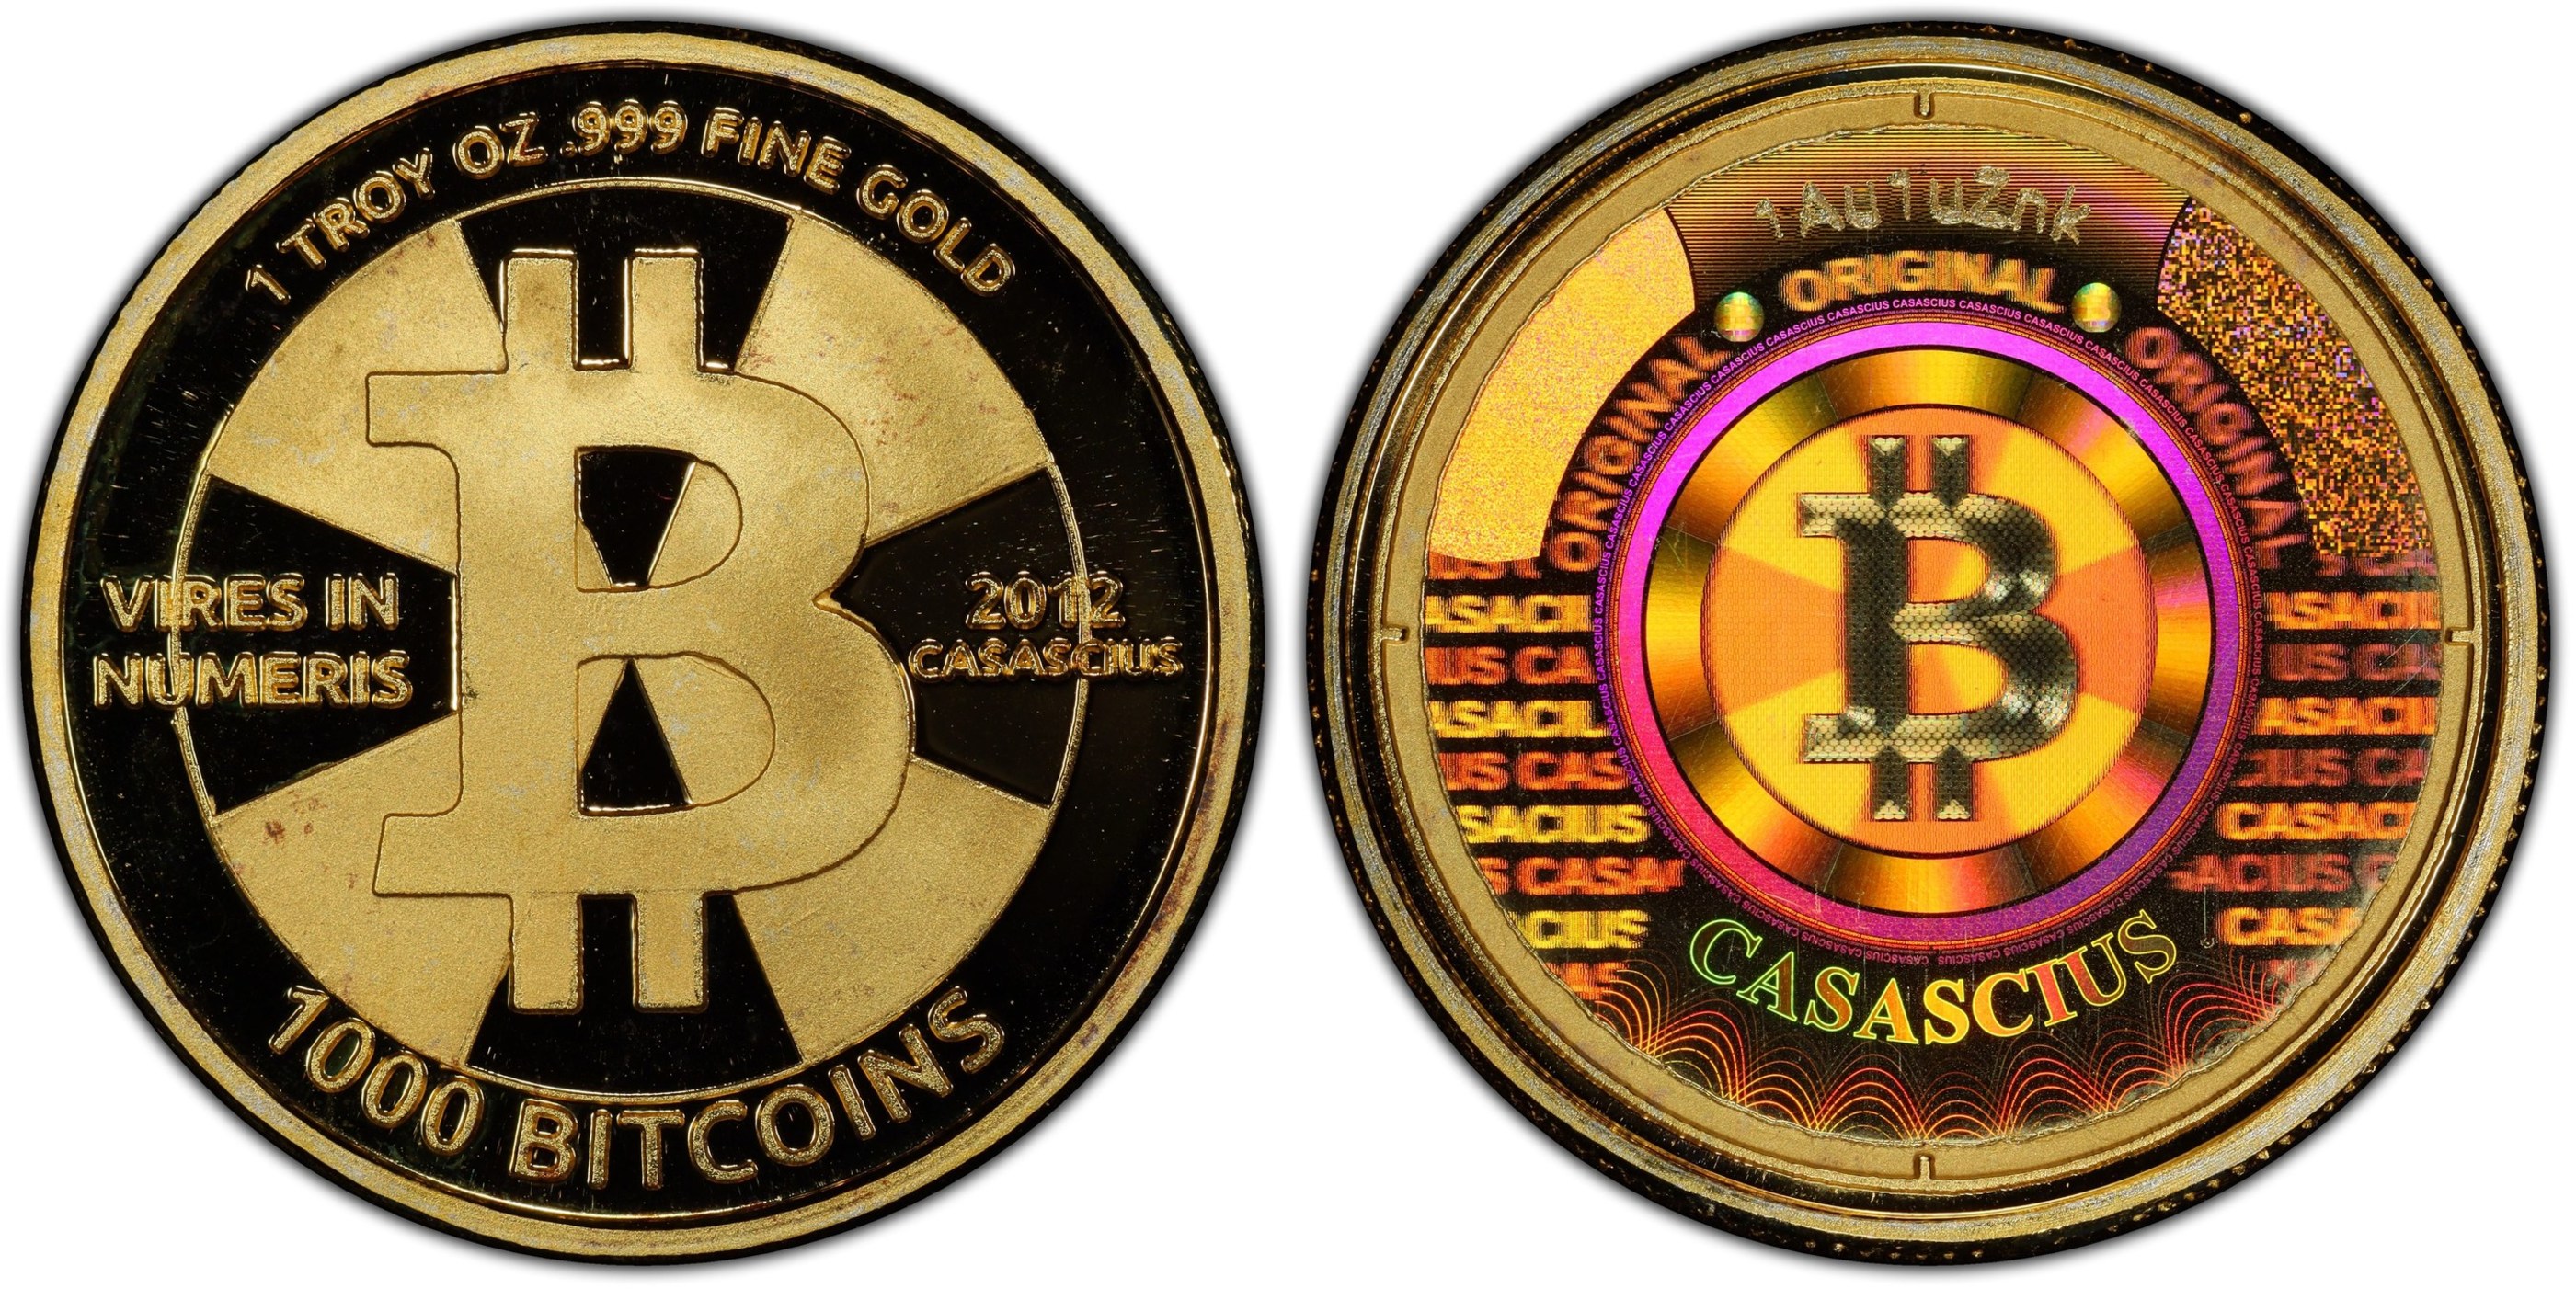 Physical bitcoin: How to tell if a physical bitcoin is real - bitcoinhelp.fun